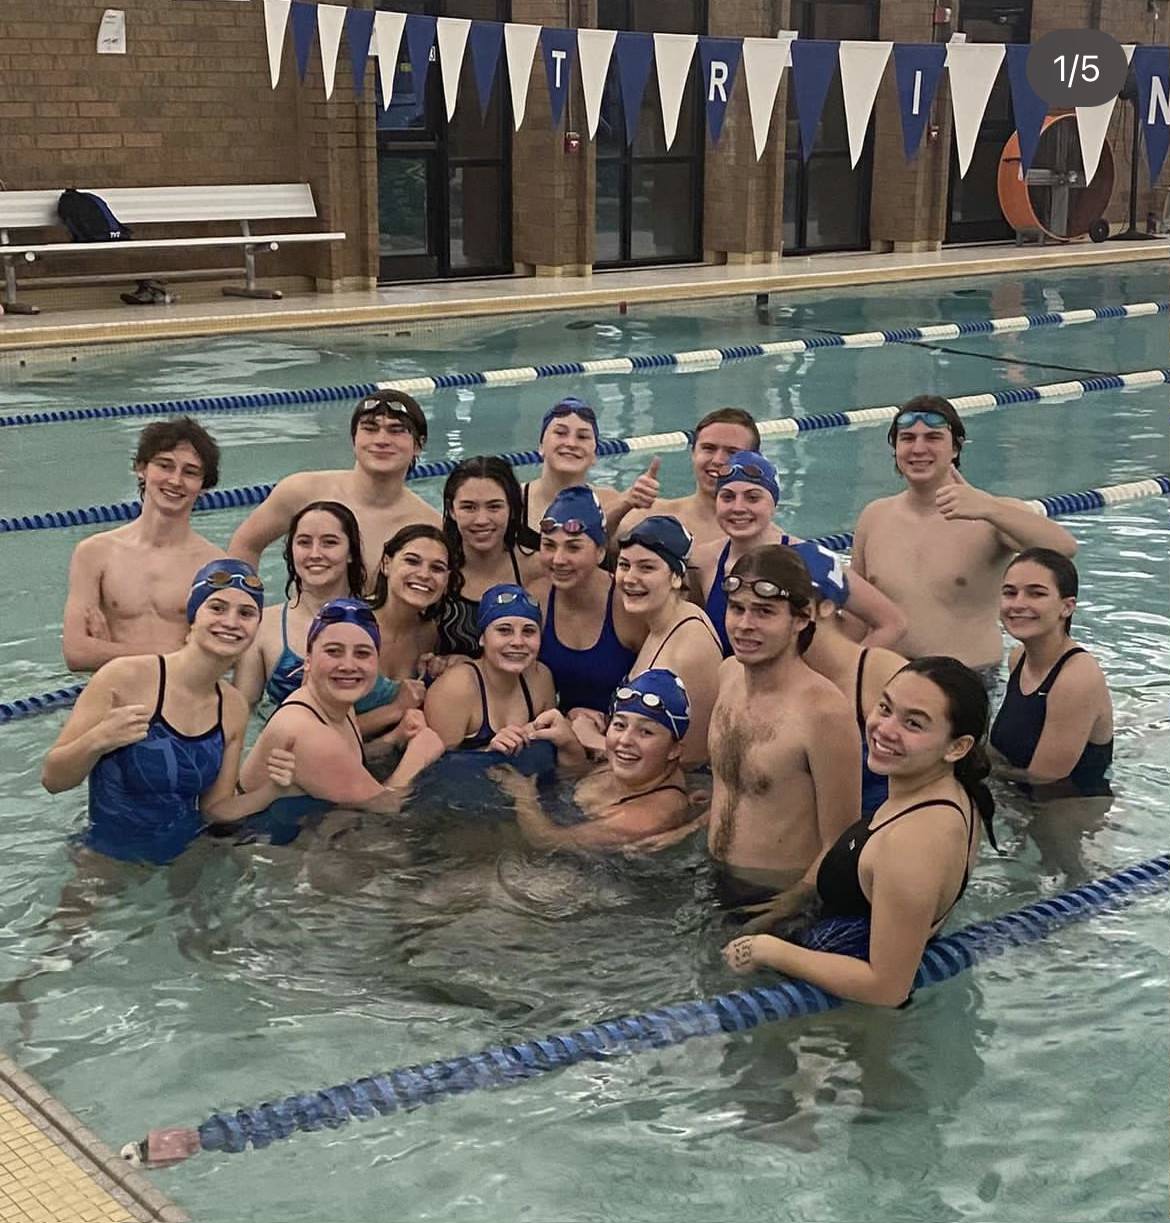 Pictured is the varsity swim team gathering in the pool after their home scrimmage against Uniontown on November 30. They are excited to continue through this season and are striving for many wins.